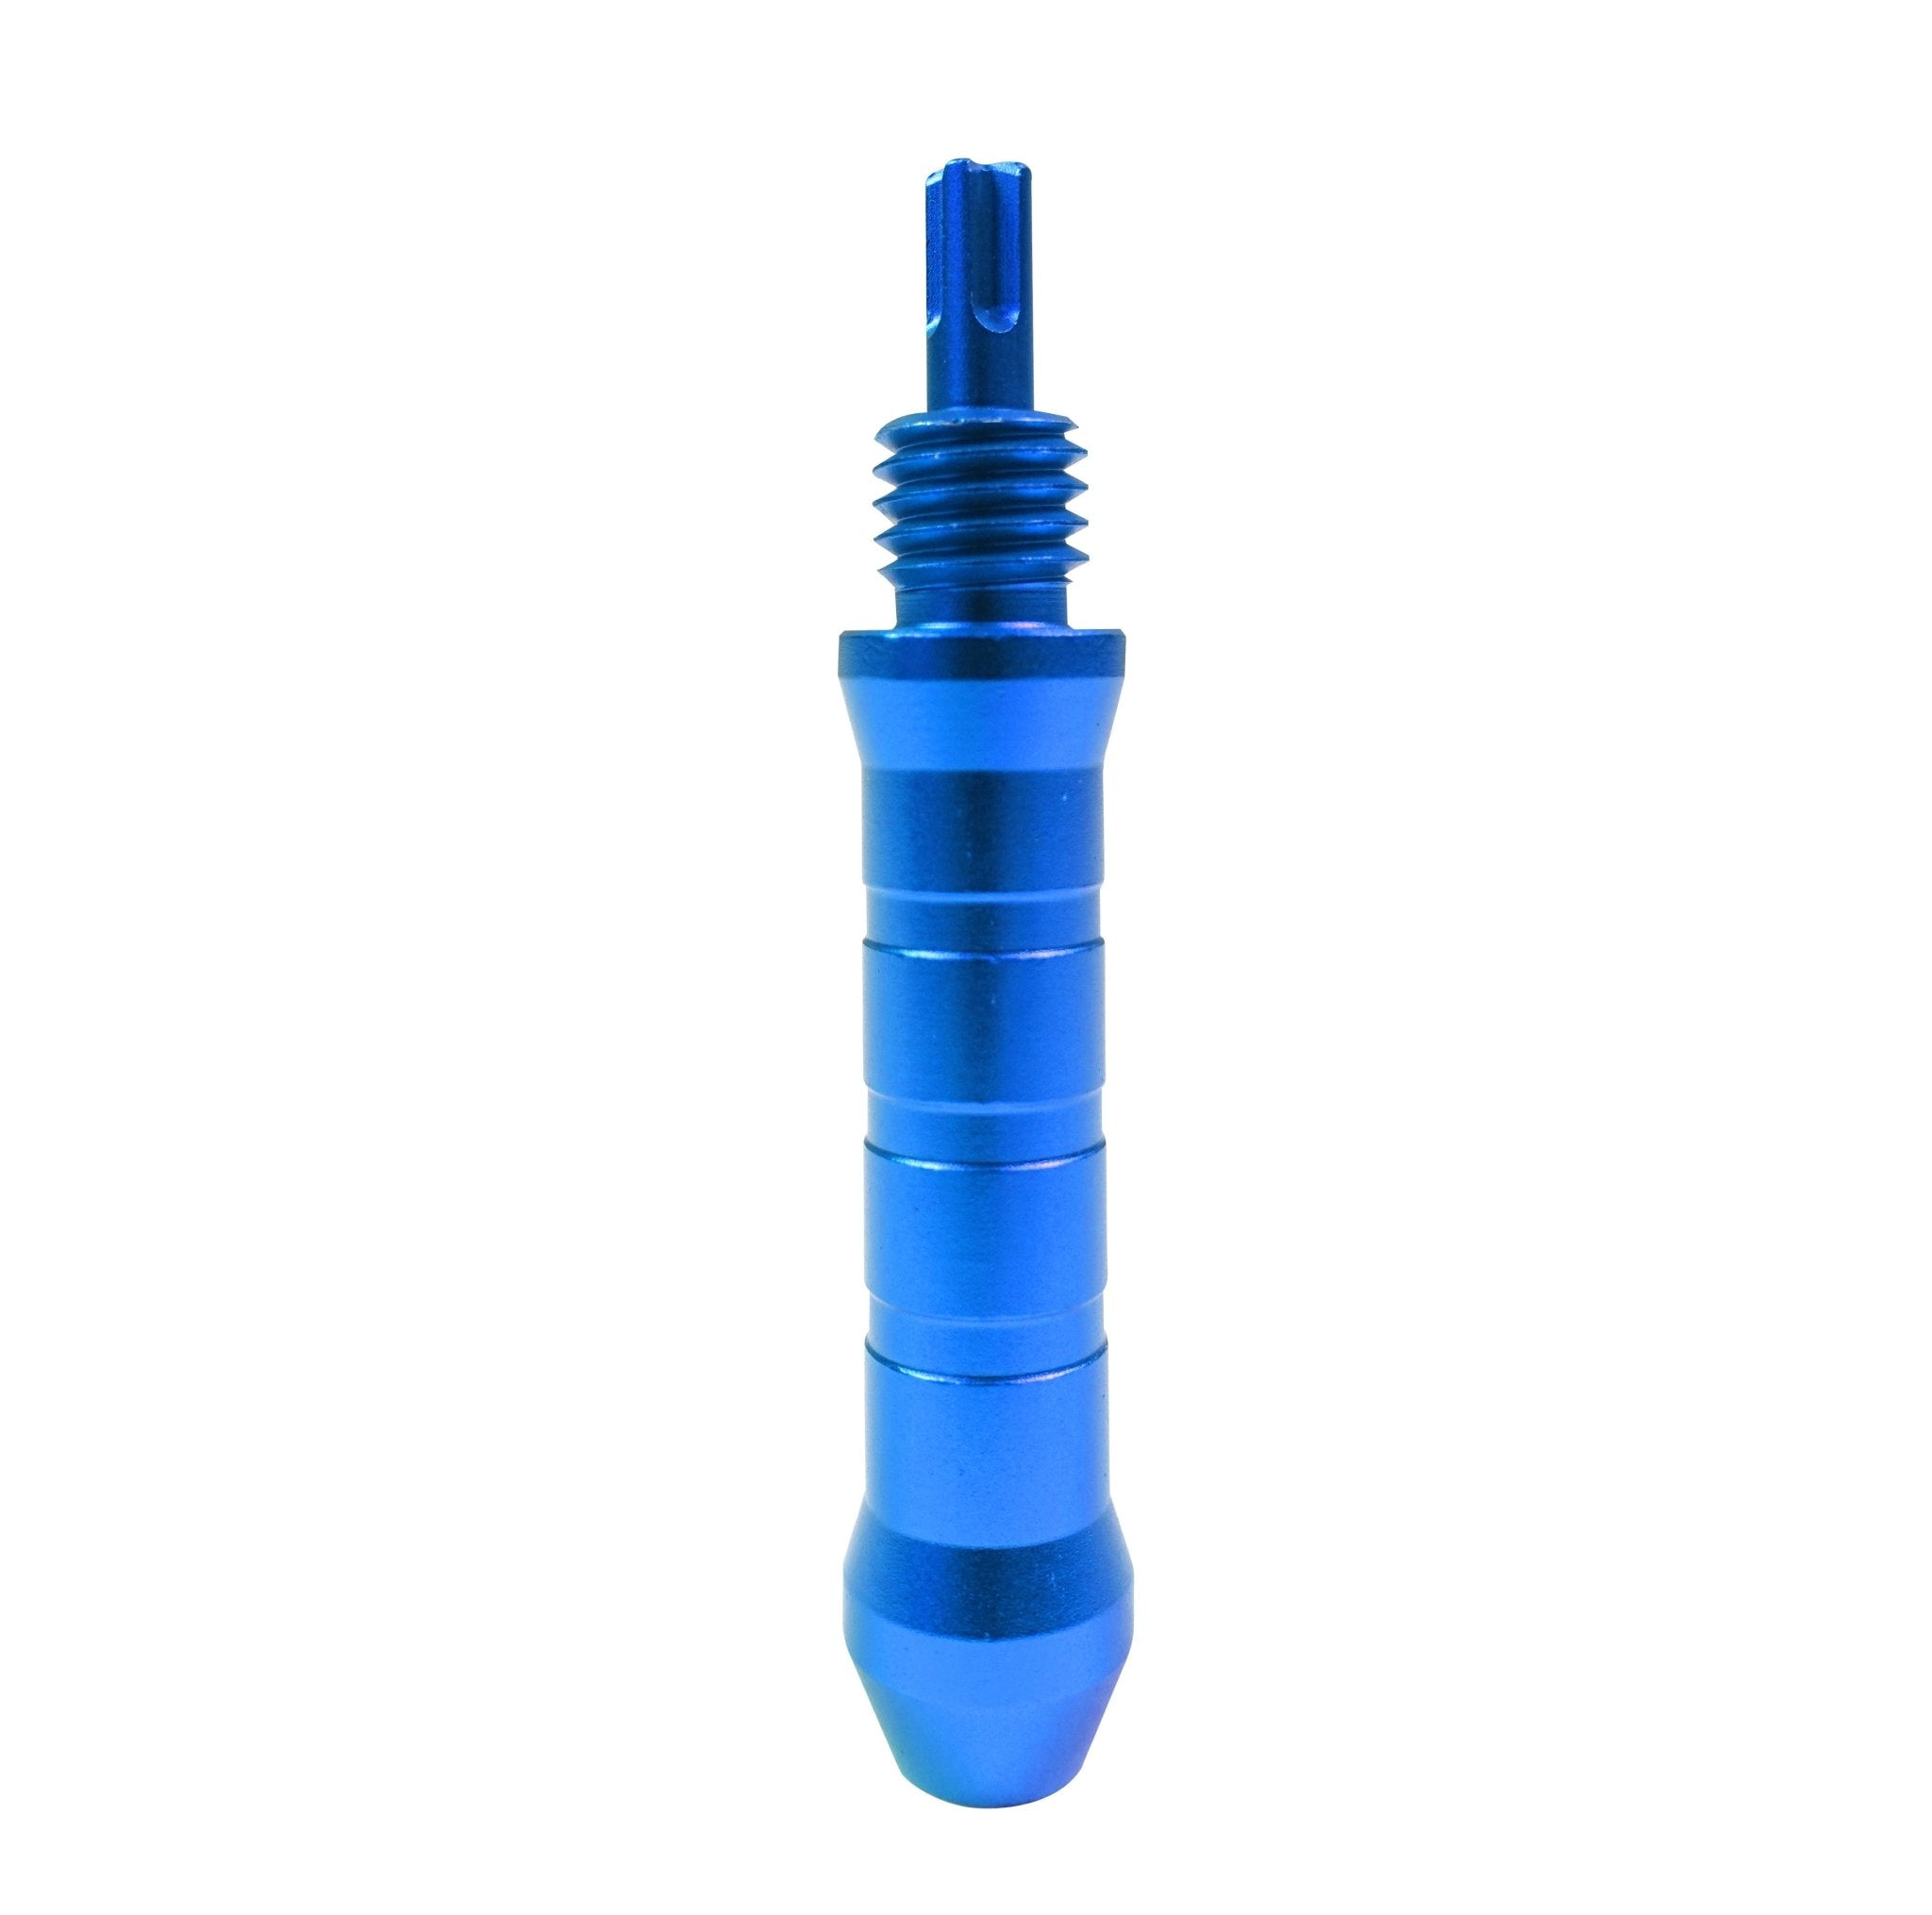 Keycap Puller 3-in-1 For Mechanical Keyboard - Blue - مزيل مفاتيح - Store 974 | ستور ٩٧٤